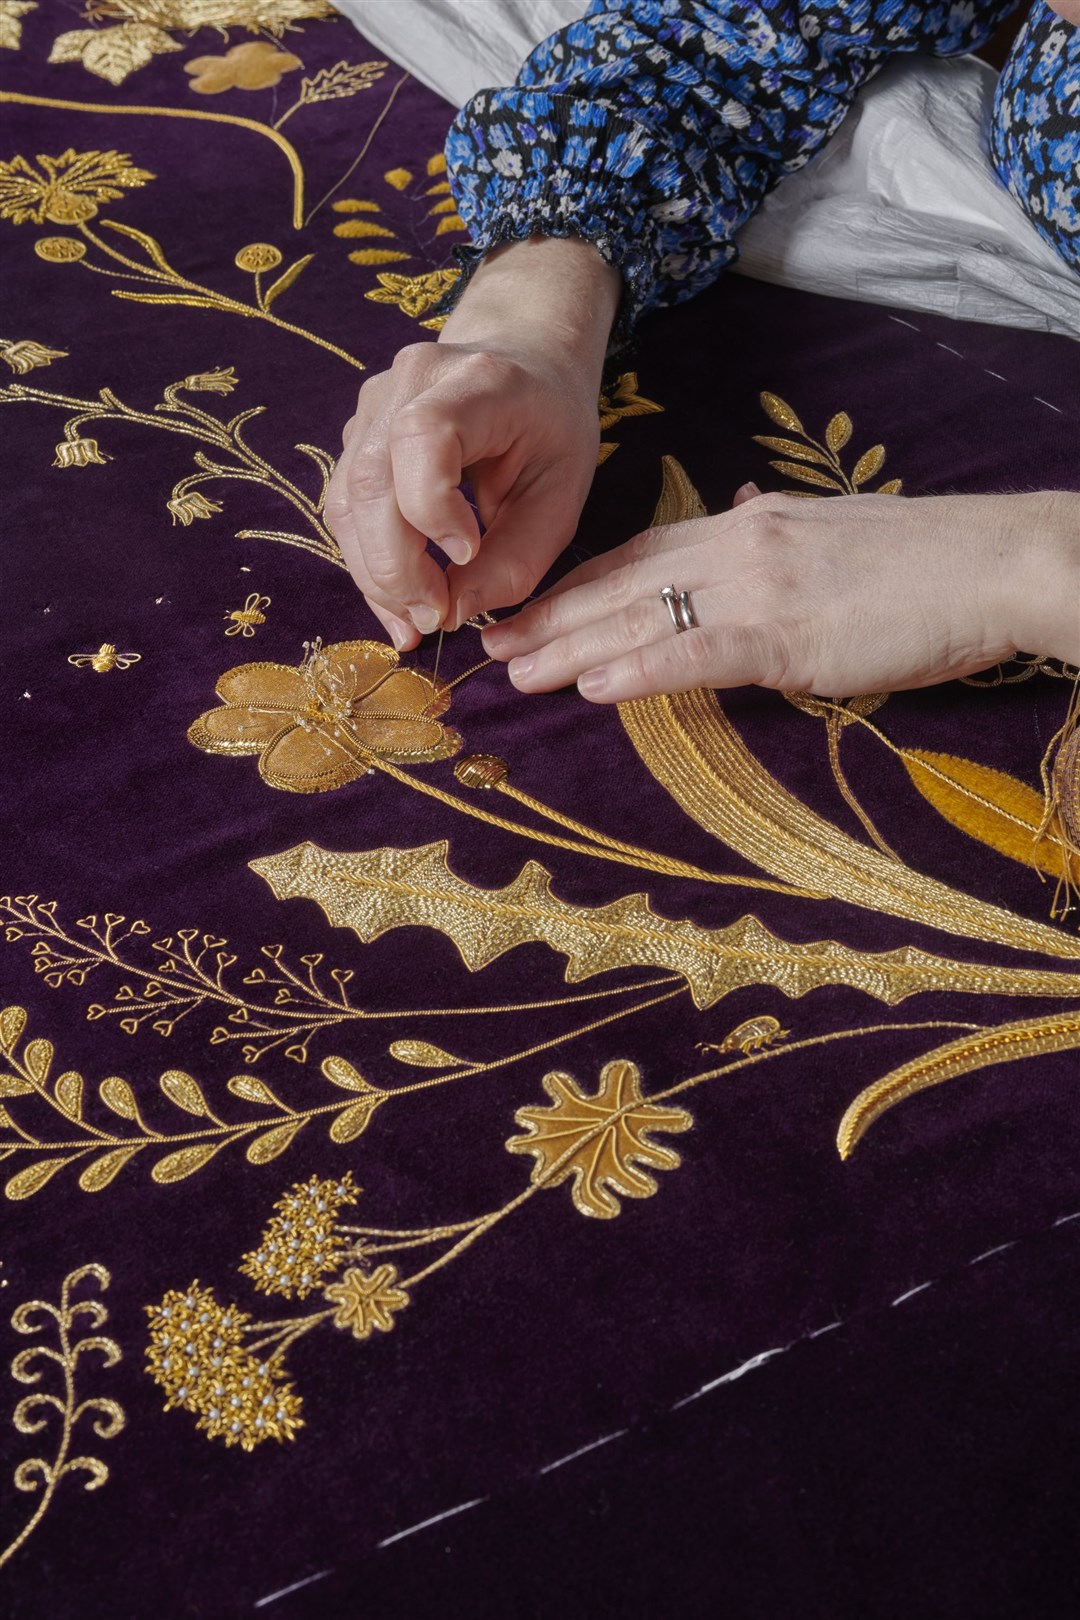 The Royal School of Needlework hand embroidering the Queen Consort’s new Robe of Estate (Royal School of Needlework/PA)